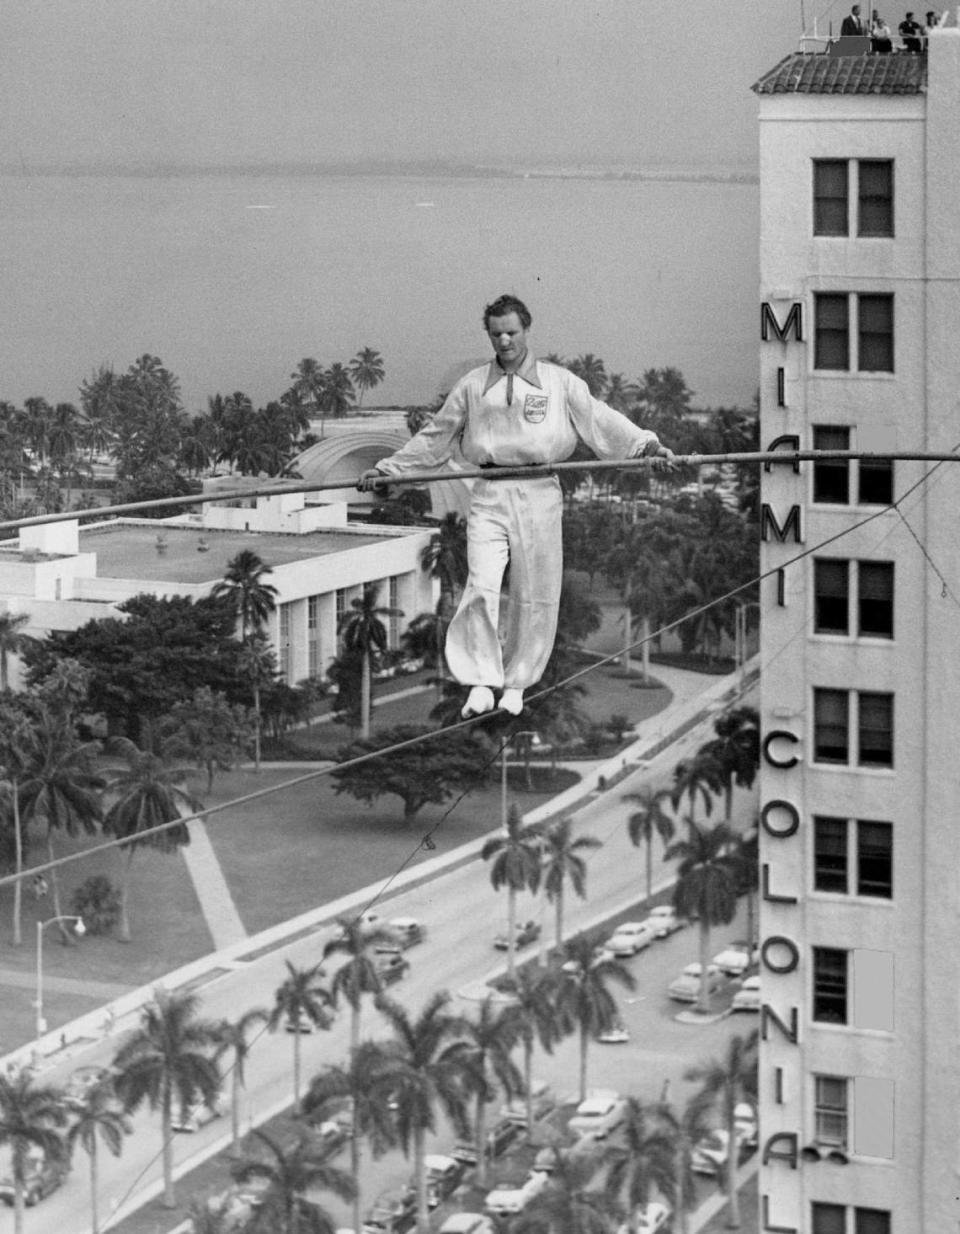 High-wire walked Heinrich Krause balances between Colonial and Everglades hotels in 1954. Miami Herald File